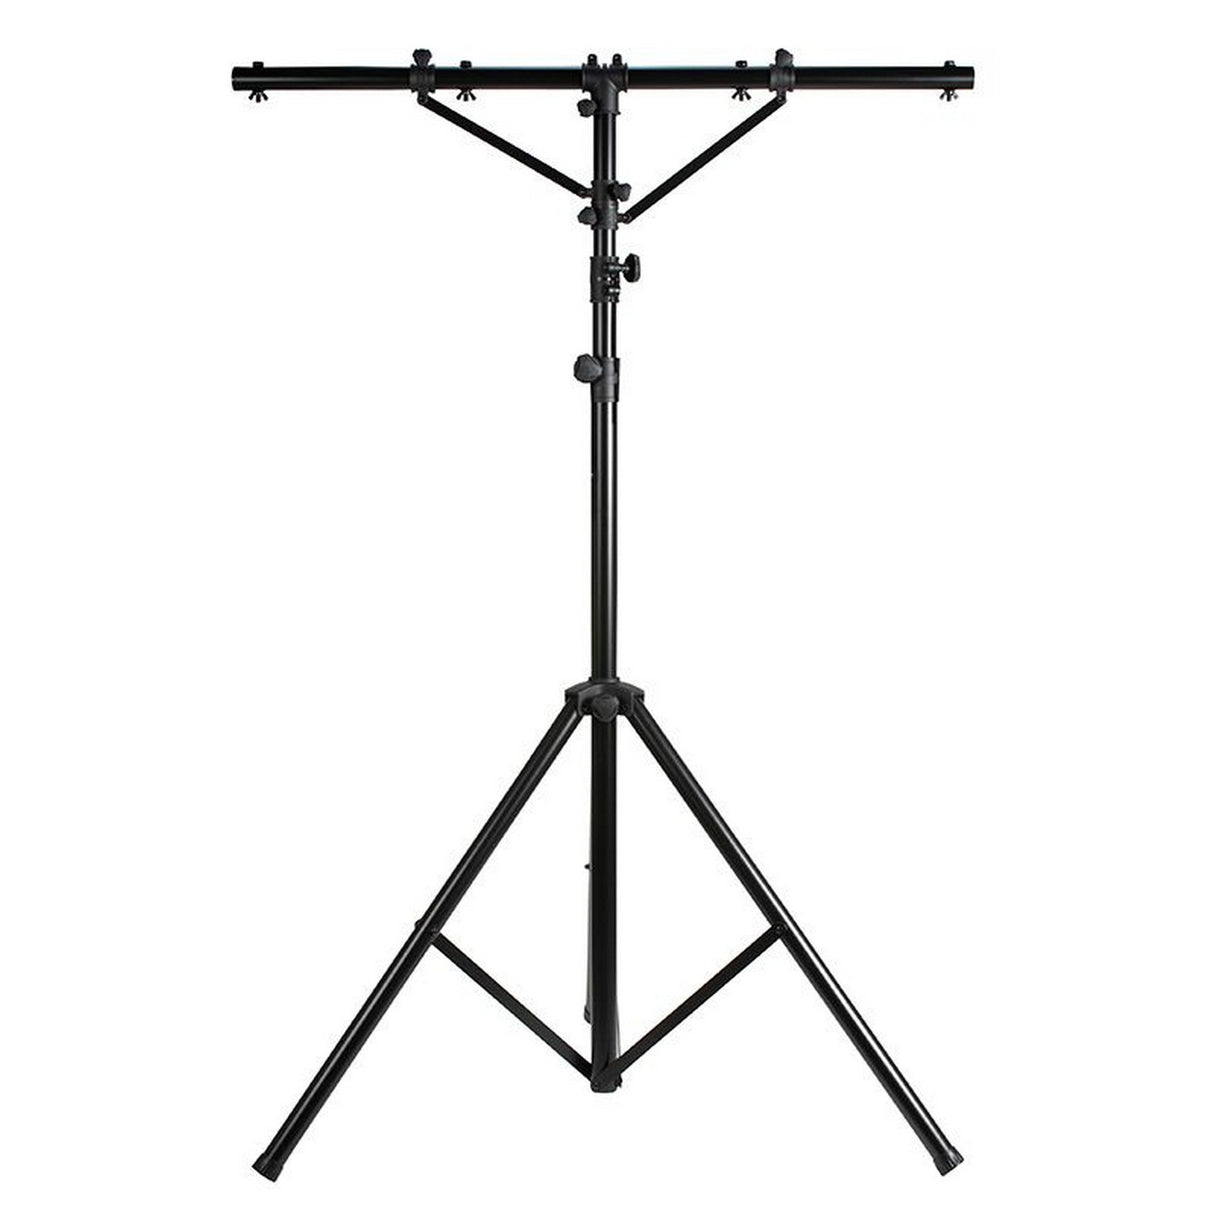 Accu Stand LTS2 AS Aluminum Lighting Tripod with 4 Mounting Points